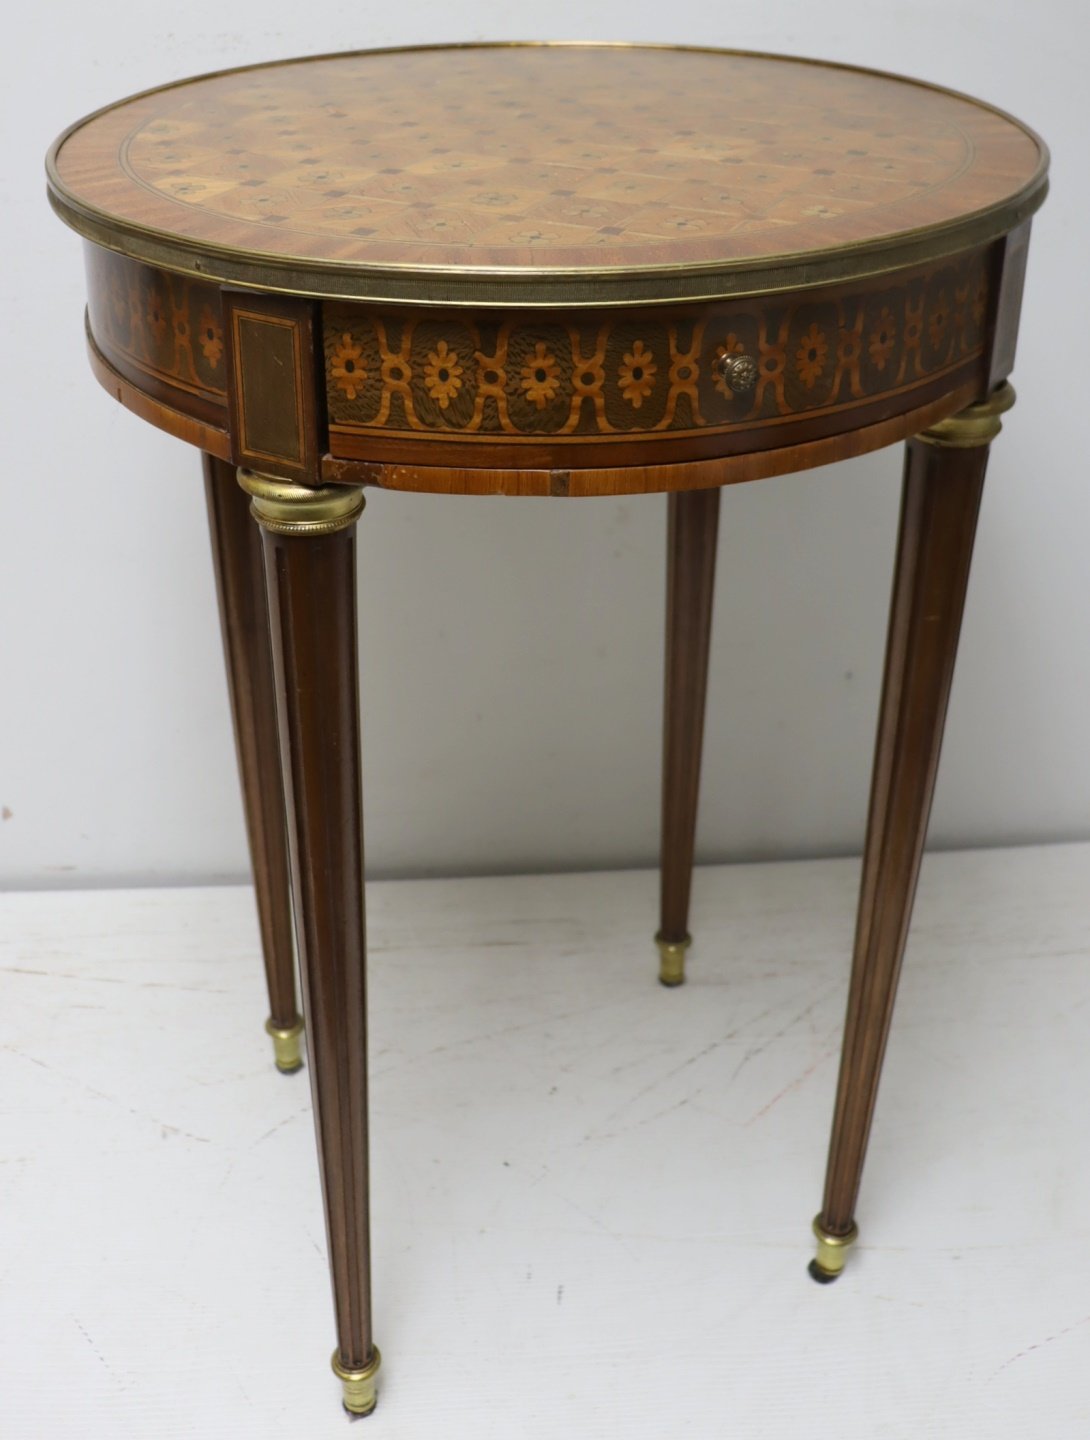 ANTIQUE FRENCH BRONZE MOUNTED INLAID